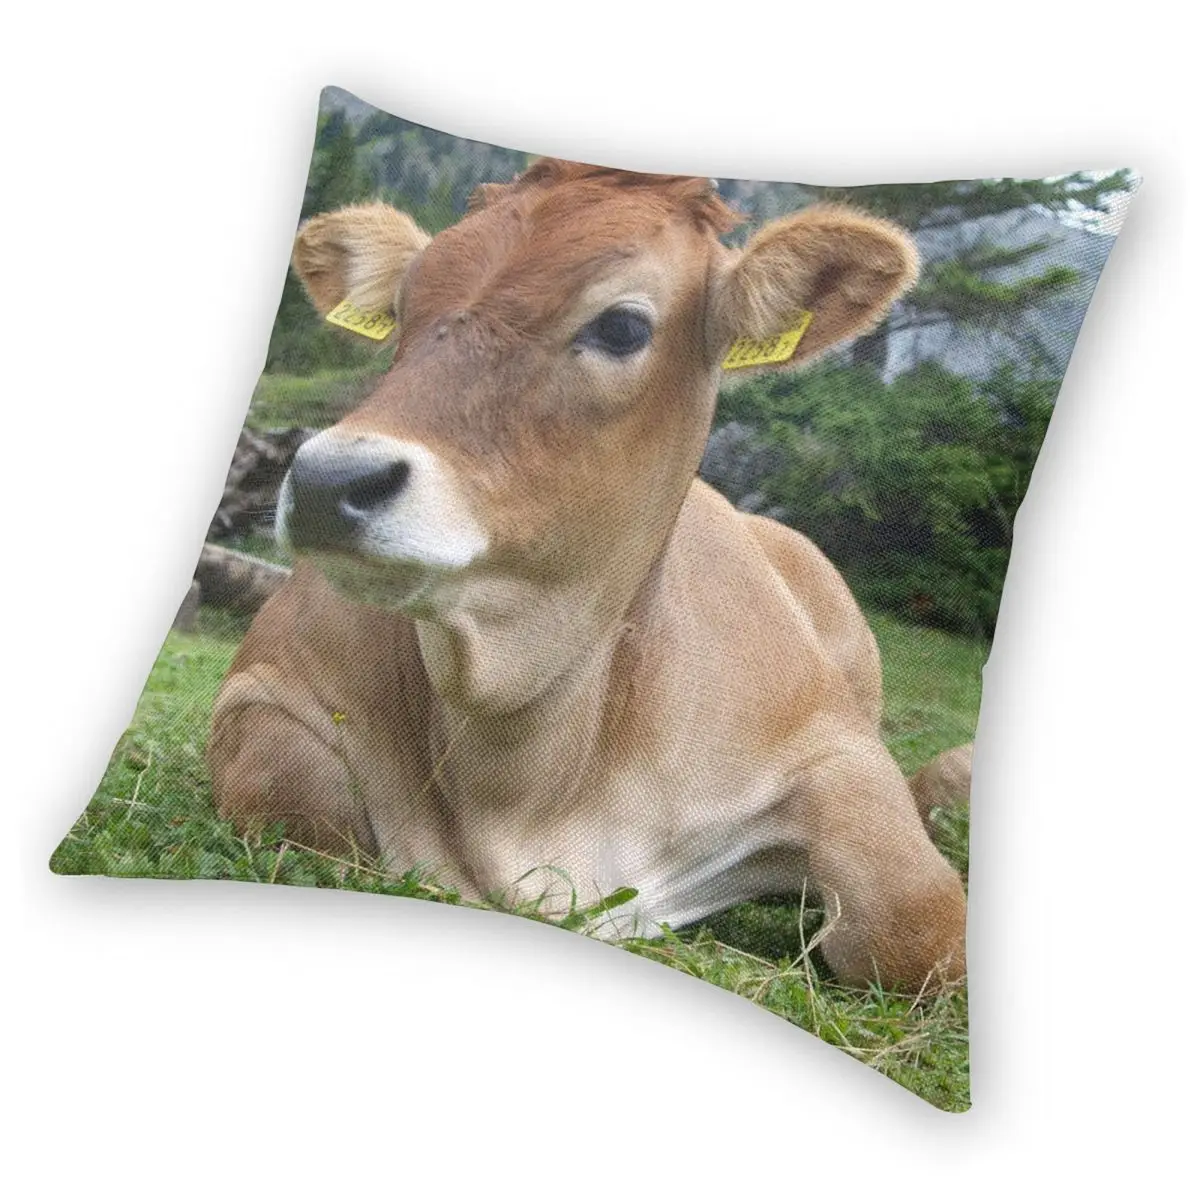 Cow Laying Down Pillowcase Polyester Linen Velvet Pattern Zip Decor Throw Pillow Case Home Cushion Cover Wholesale 18" images - 6